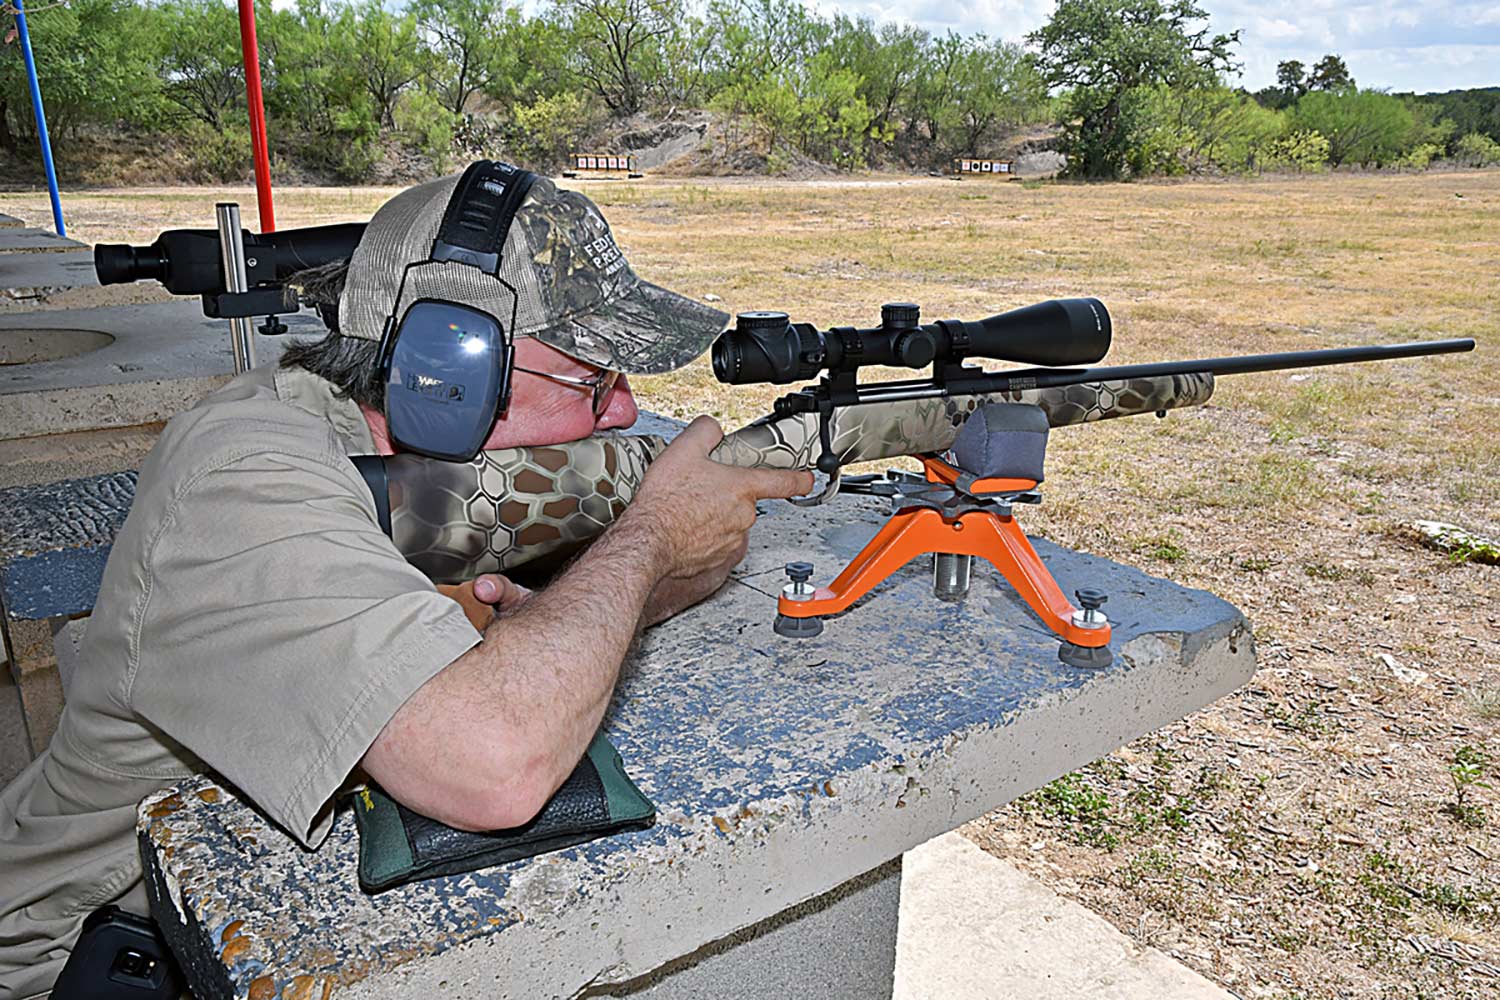 A hunter aims a scoped rifle at a shooting range.